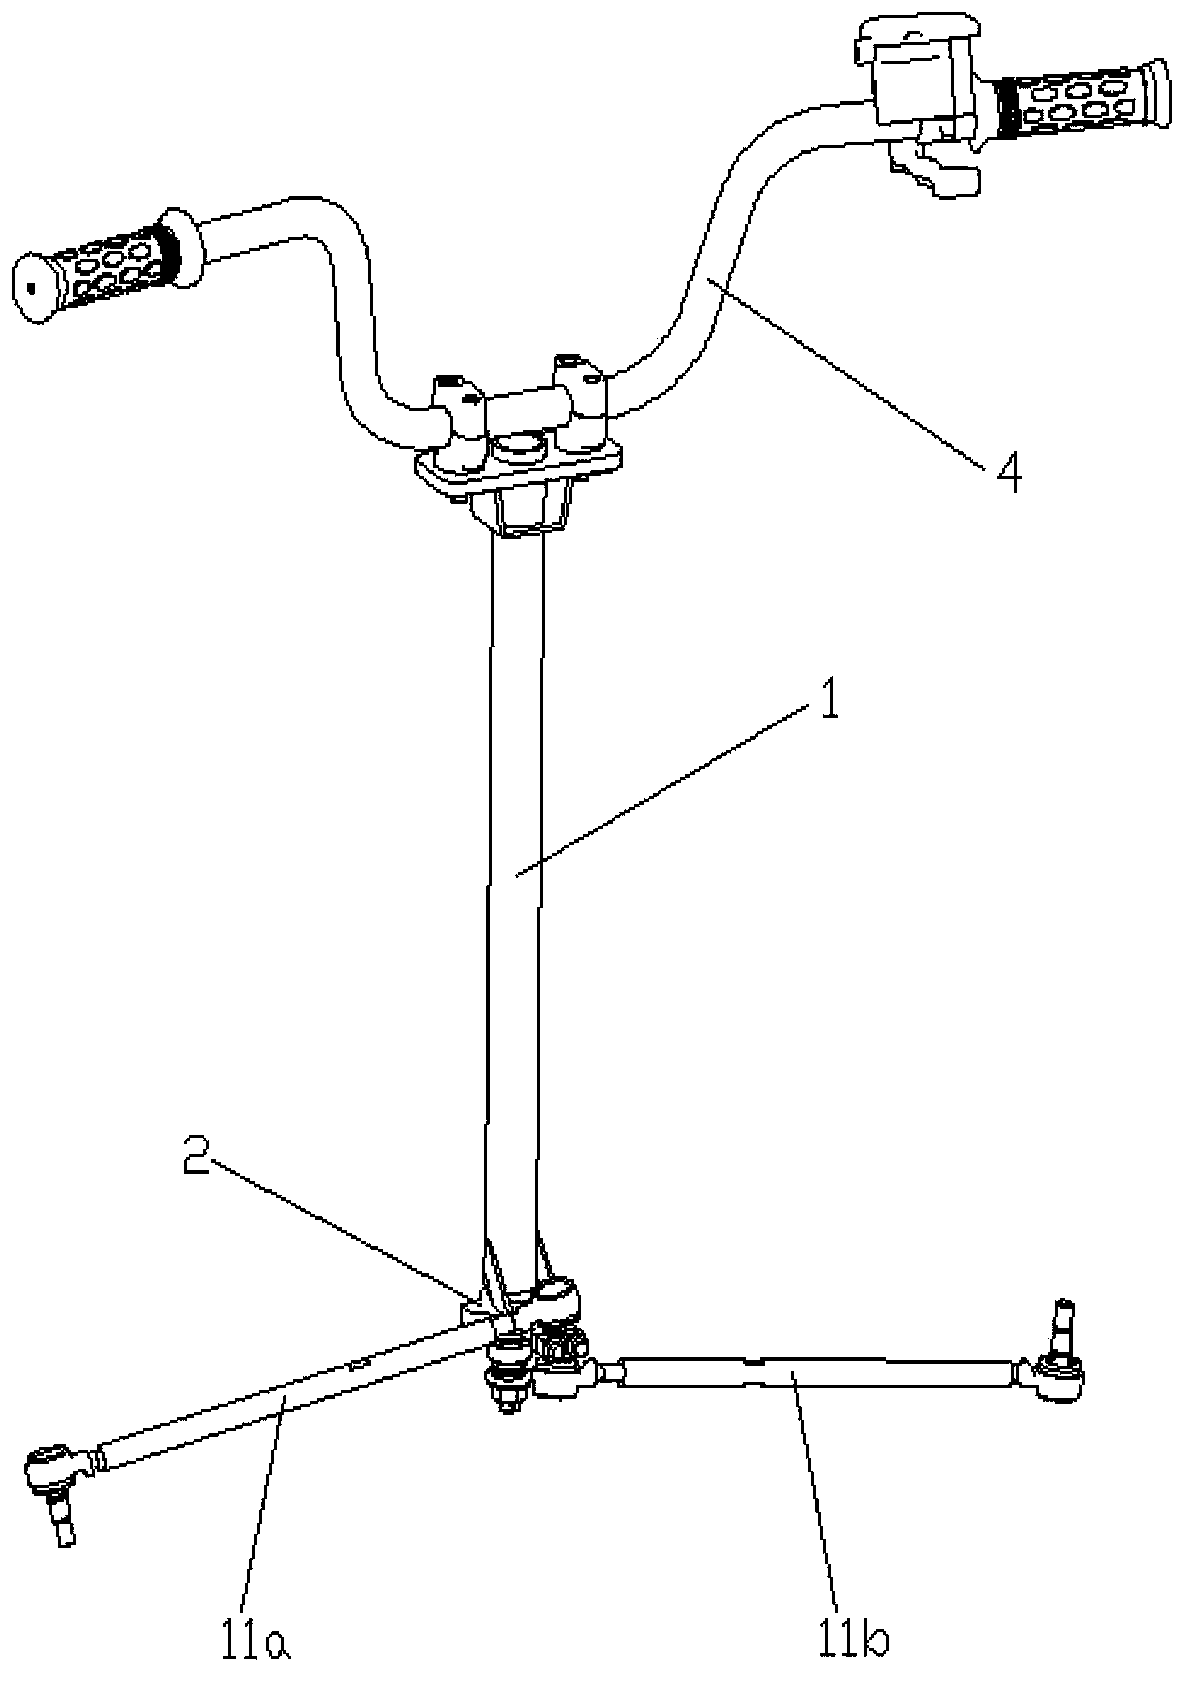 Vehicle steering assembly and all-terrain vehicle